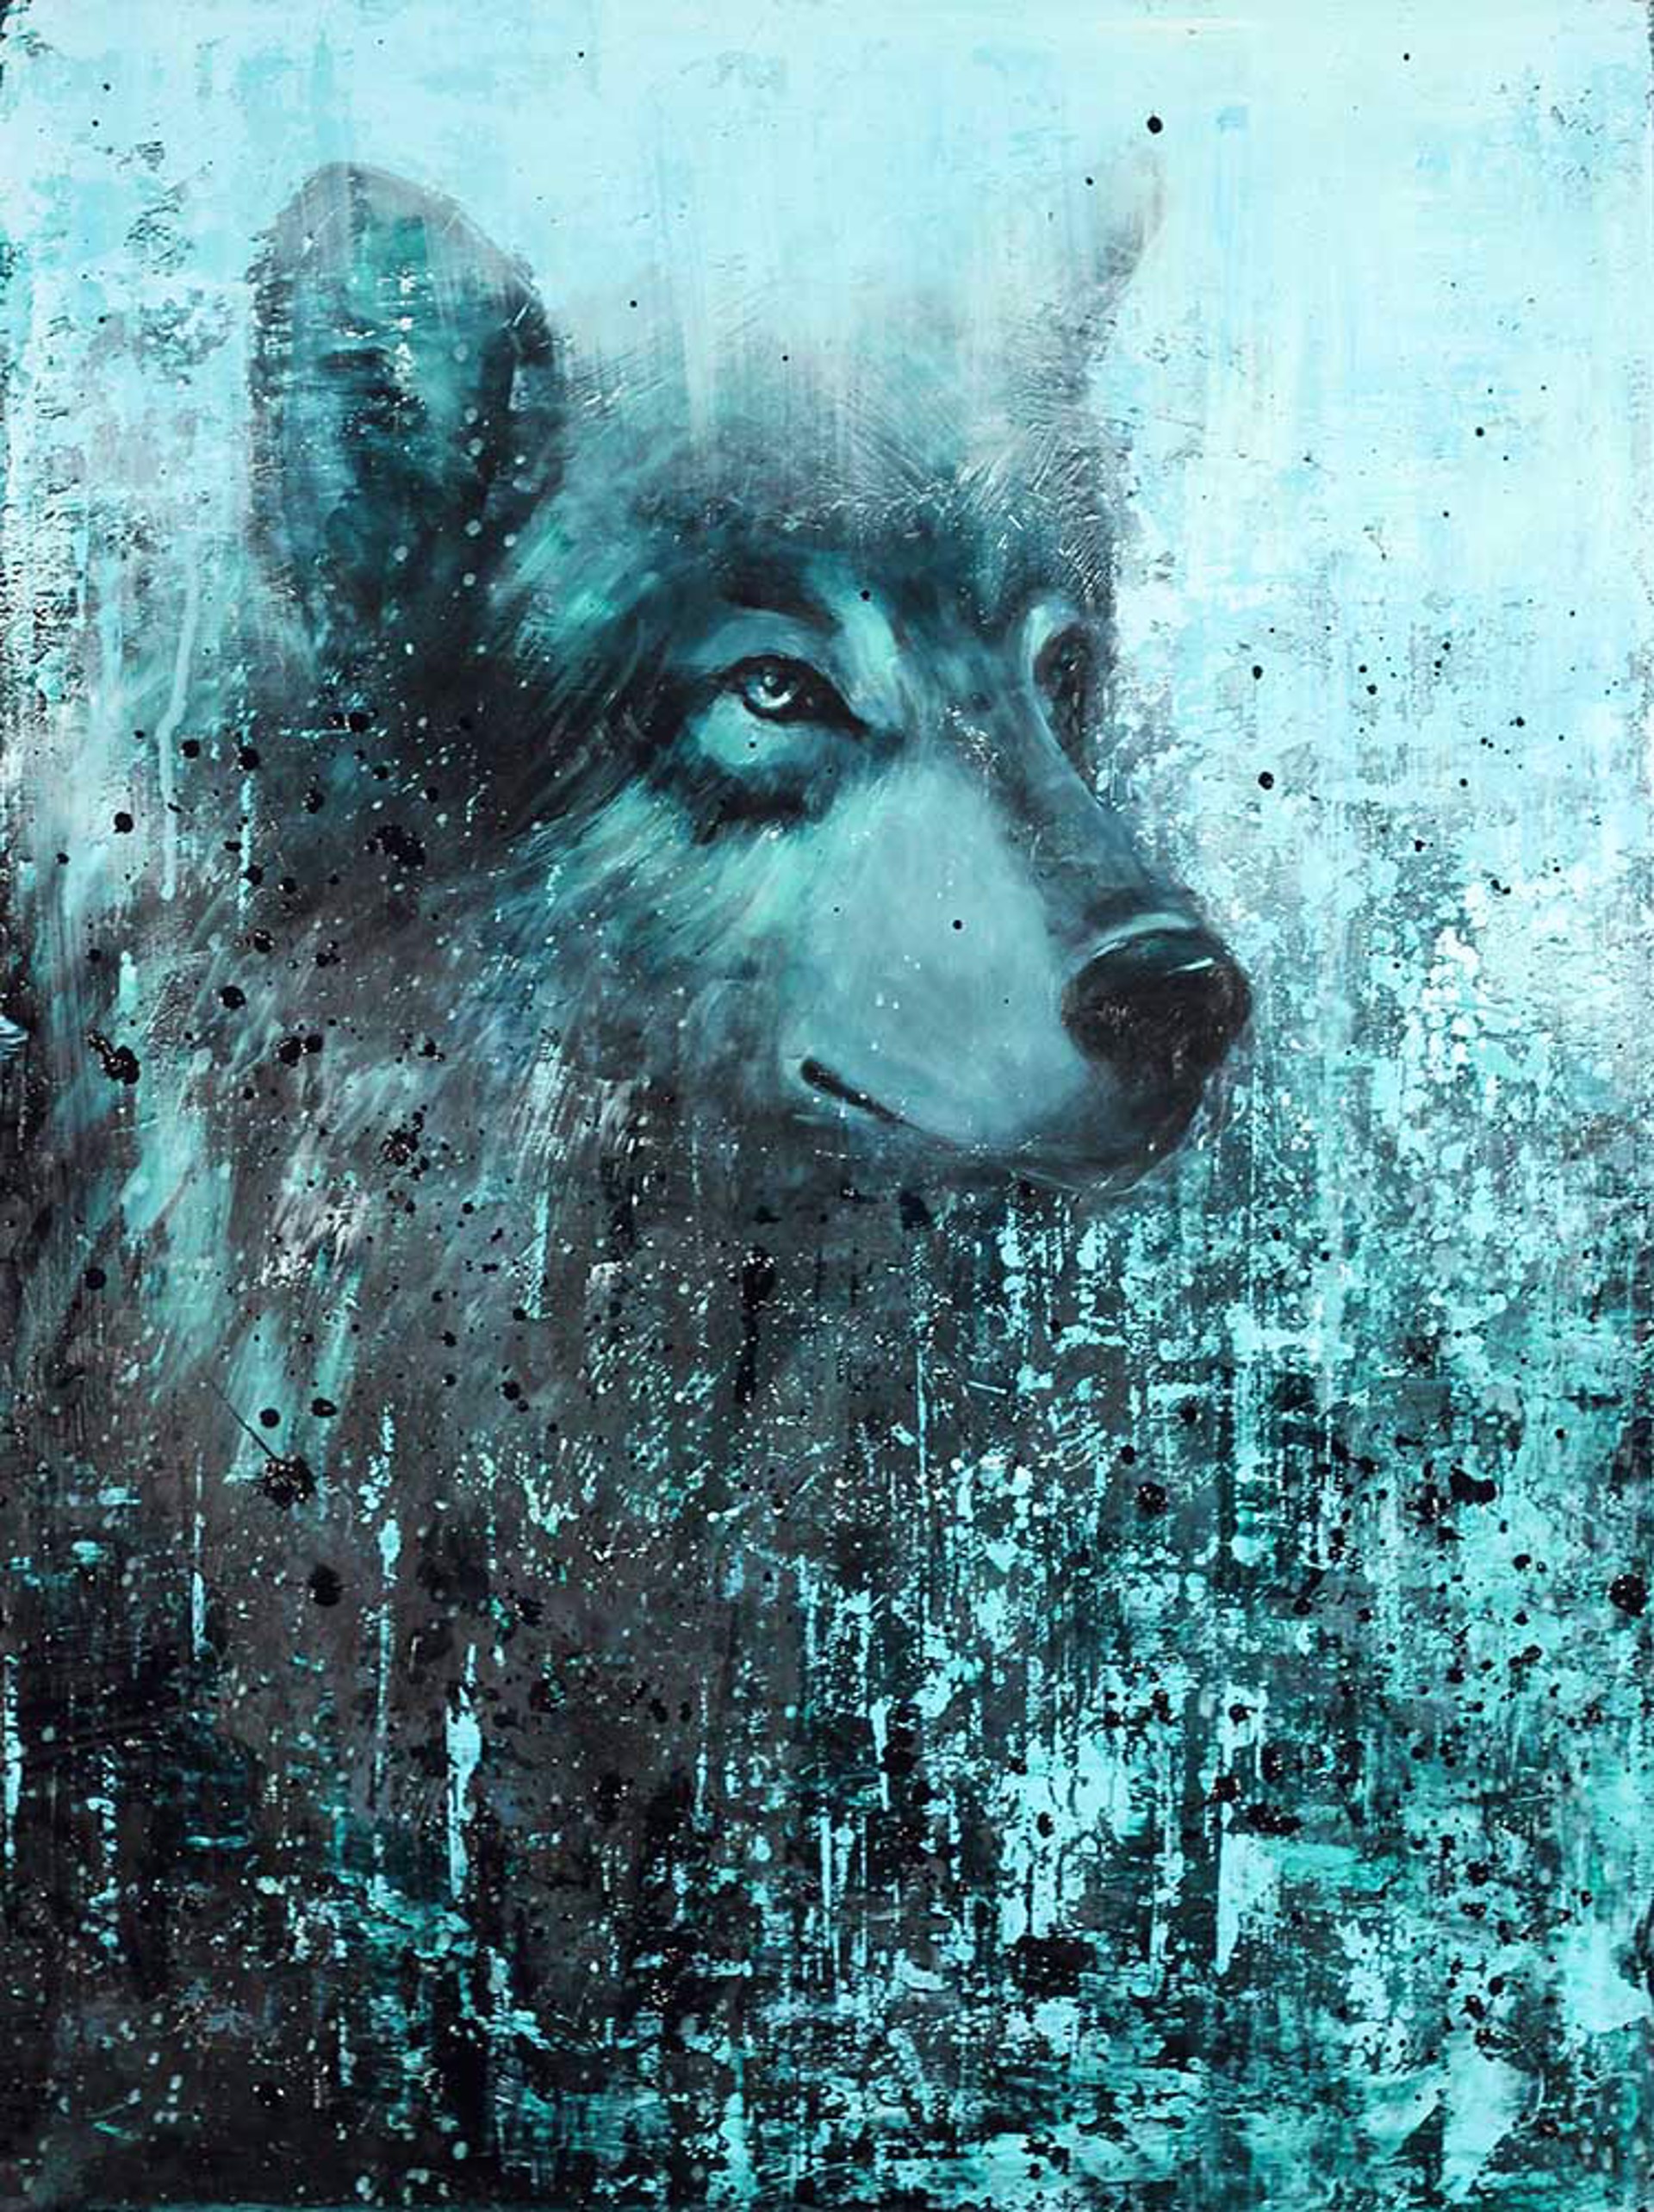 Wolf Profile In Blue Hues Original Painting Using Mixed Media on Panel, A Contemporary Fine Art And Modern Wildlife Art Piece Available At Gallery Wild